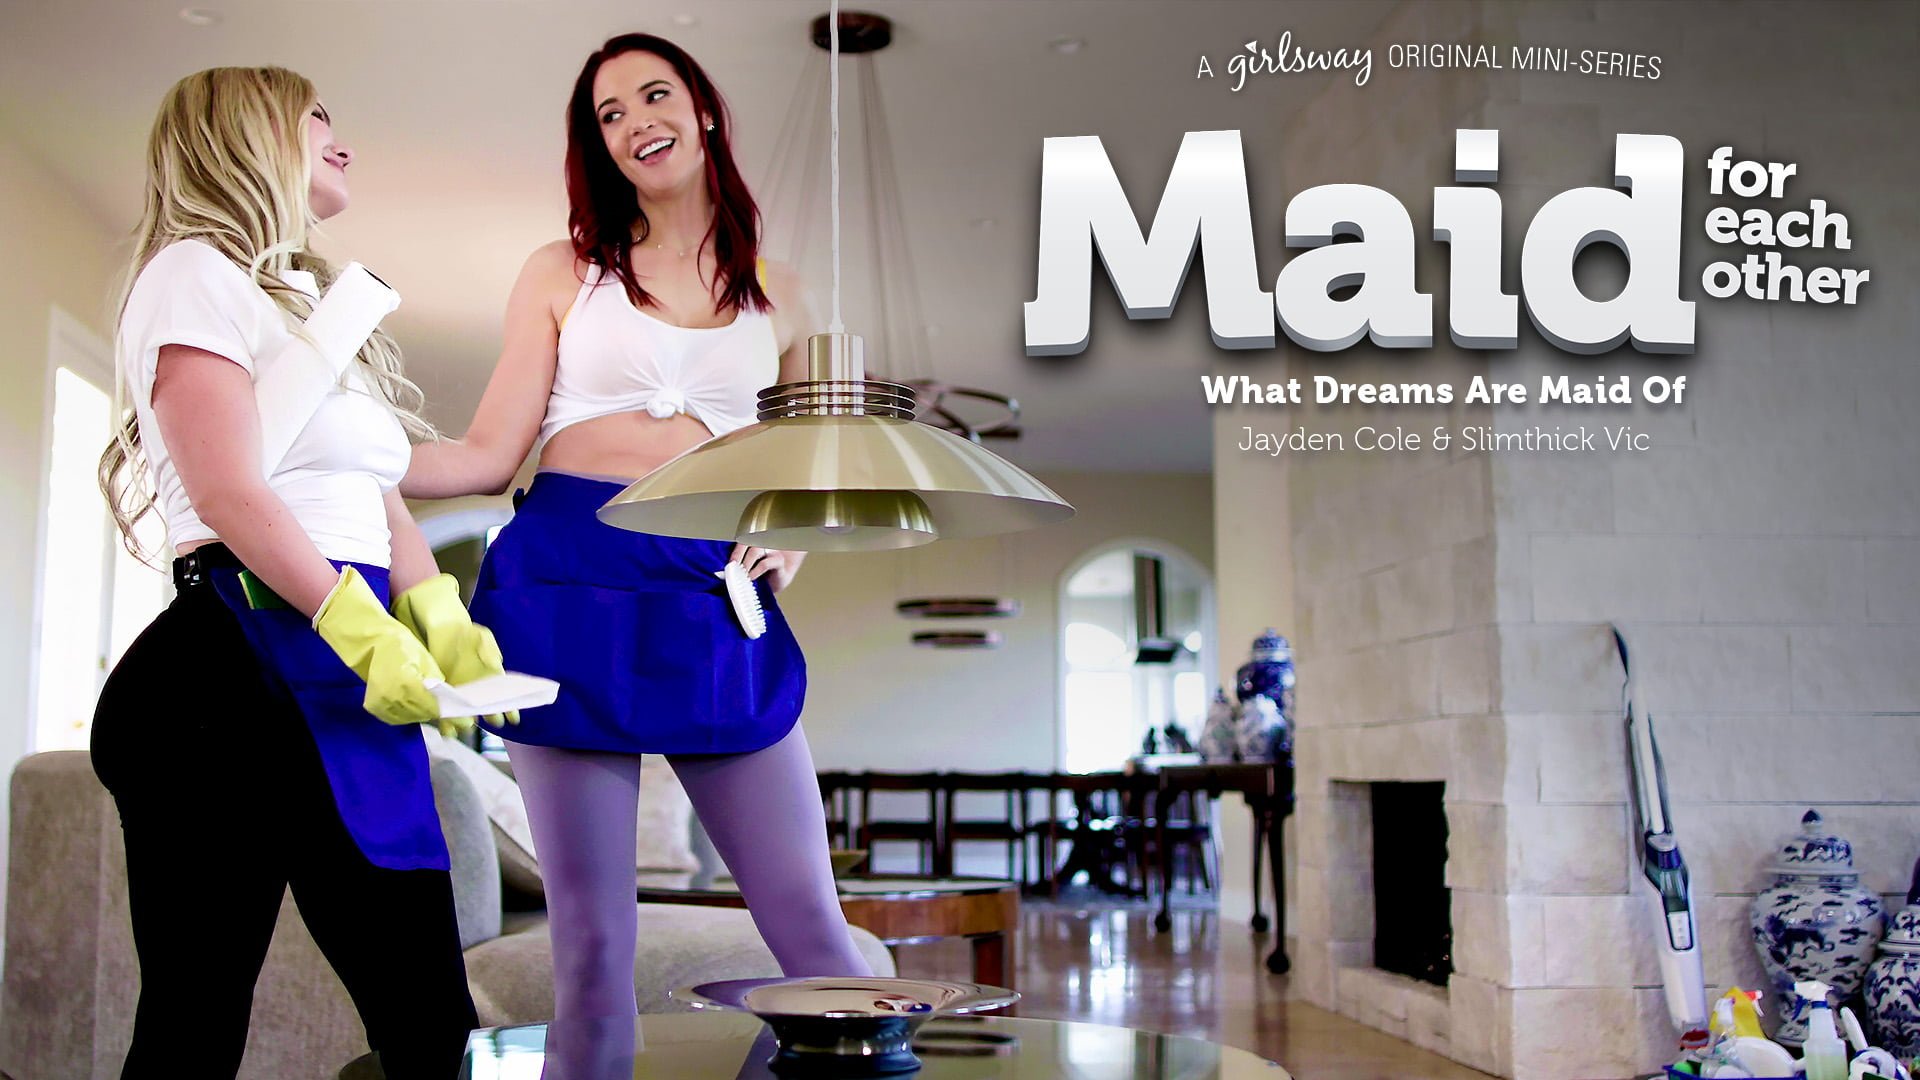 GirlsWay &#8211; Jayden Cole And Slimthick Vic &#8211; Maid For Each Other: What Dreams Are Maid Of